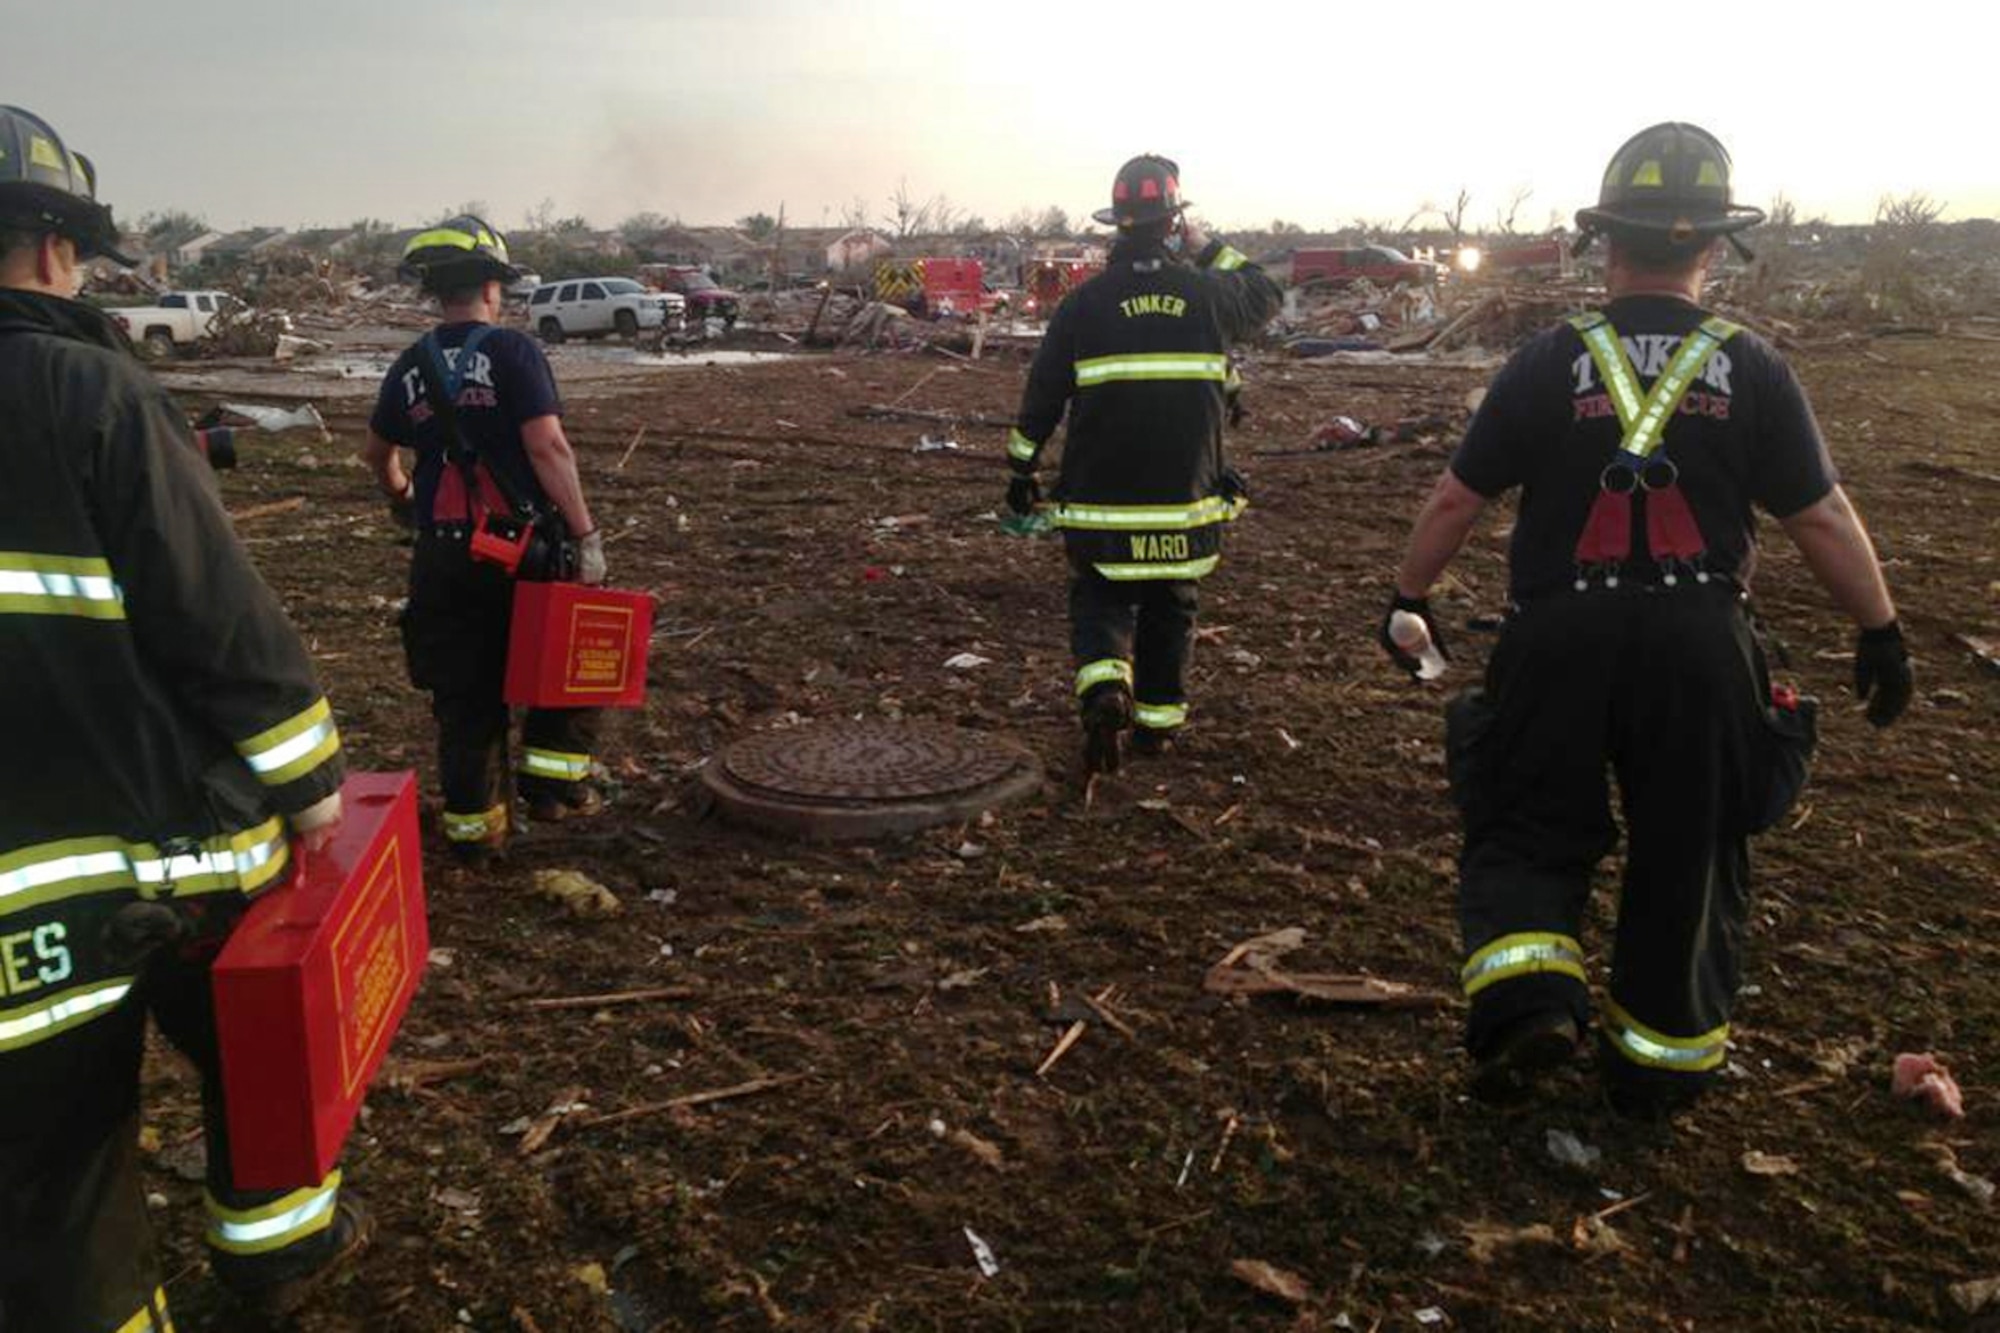 A Tinker Fire and Emergency Services crew responds to the May 20 tornado that struck Moore, Okla. Twelve base firefighters and one safety officer were immediately dispatched to assist with rescue activities in the vicinity of 19th street and Interstate 35 in Moore, and one surgeon was dispatched to OU Medical Center. More help has been provided overnight with lights, vehicles, water trucks and volunteer Airmen are preparing to assist with crowd control and recovery efforts. (Photo courtesy of Tinker Fire and Emergency Services)
